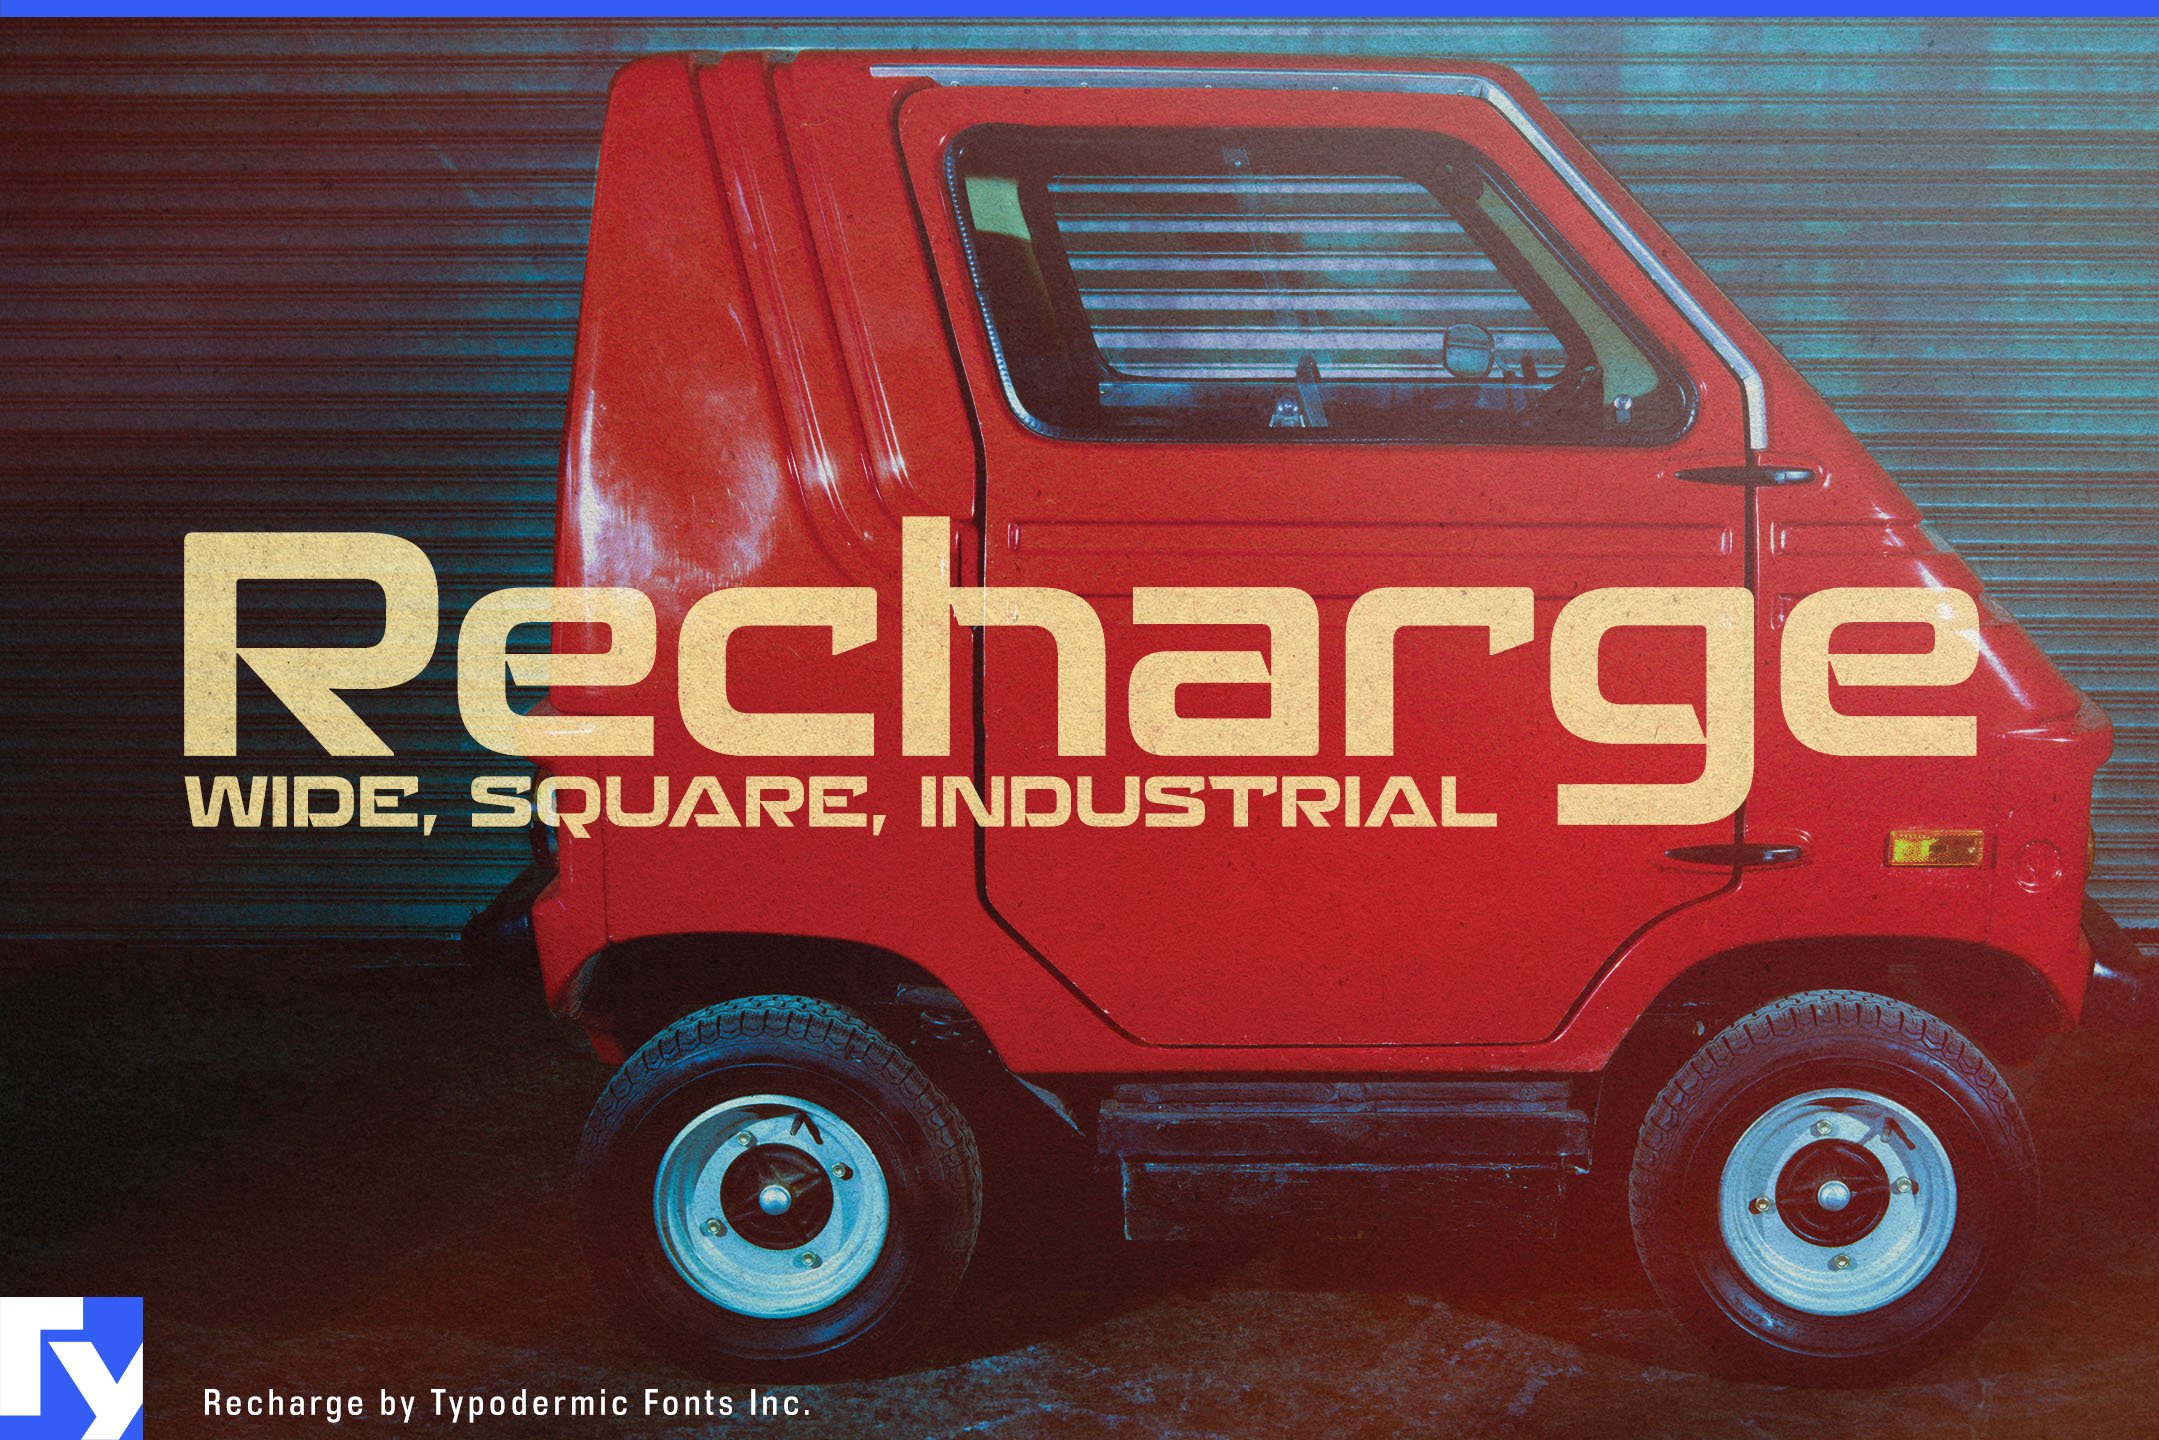 Recharge cover image.